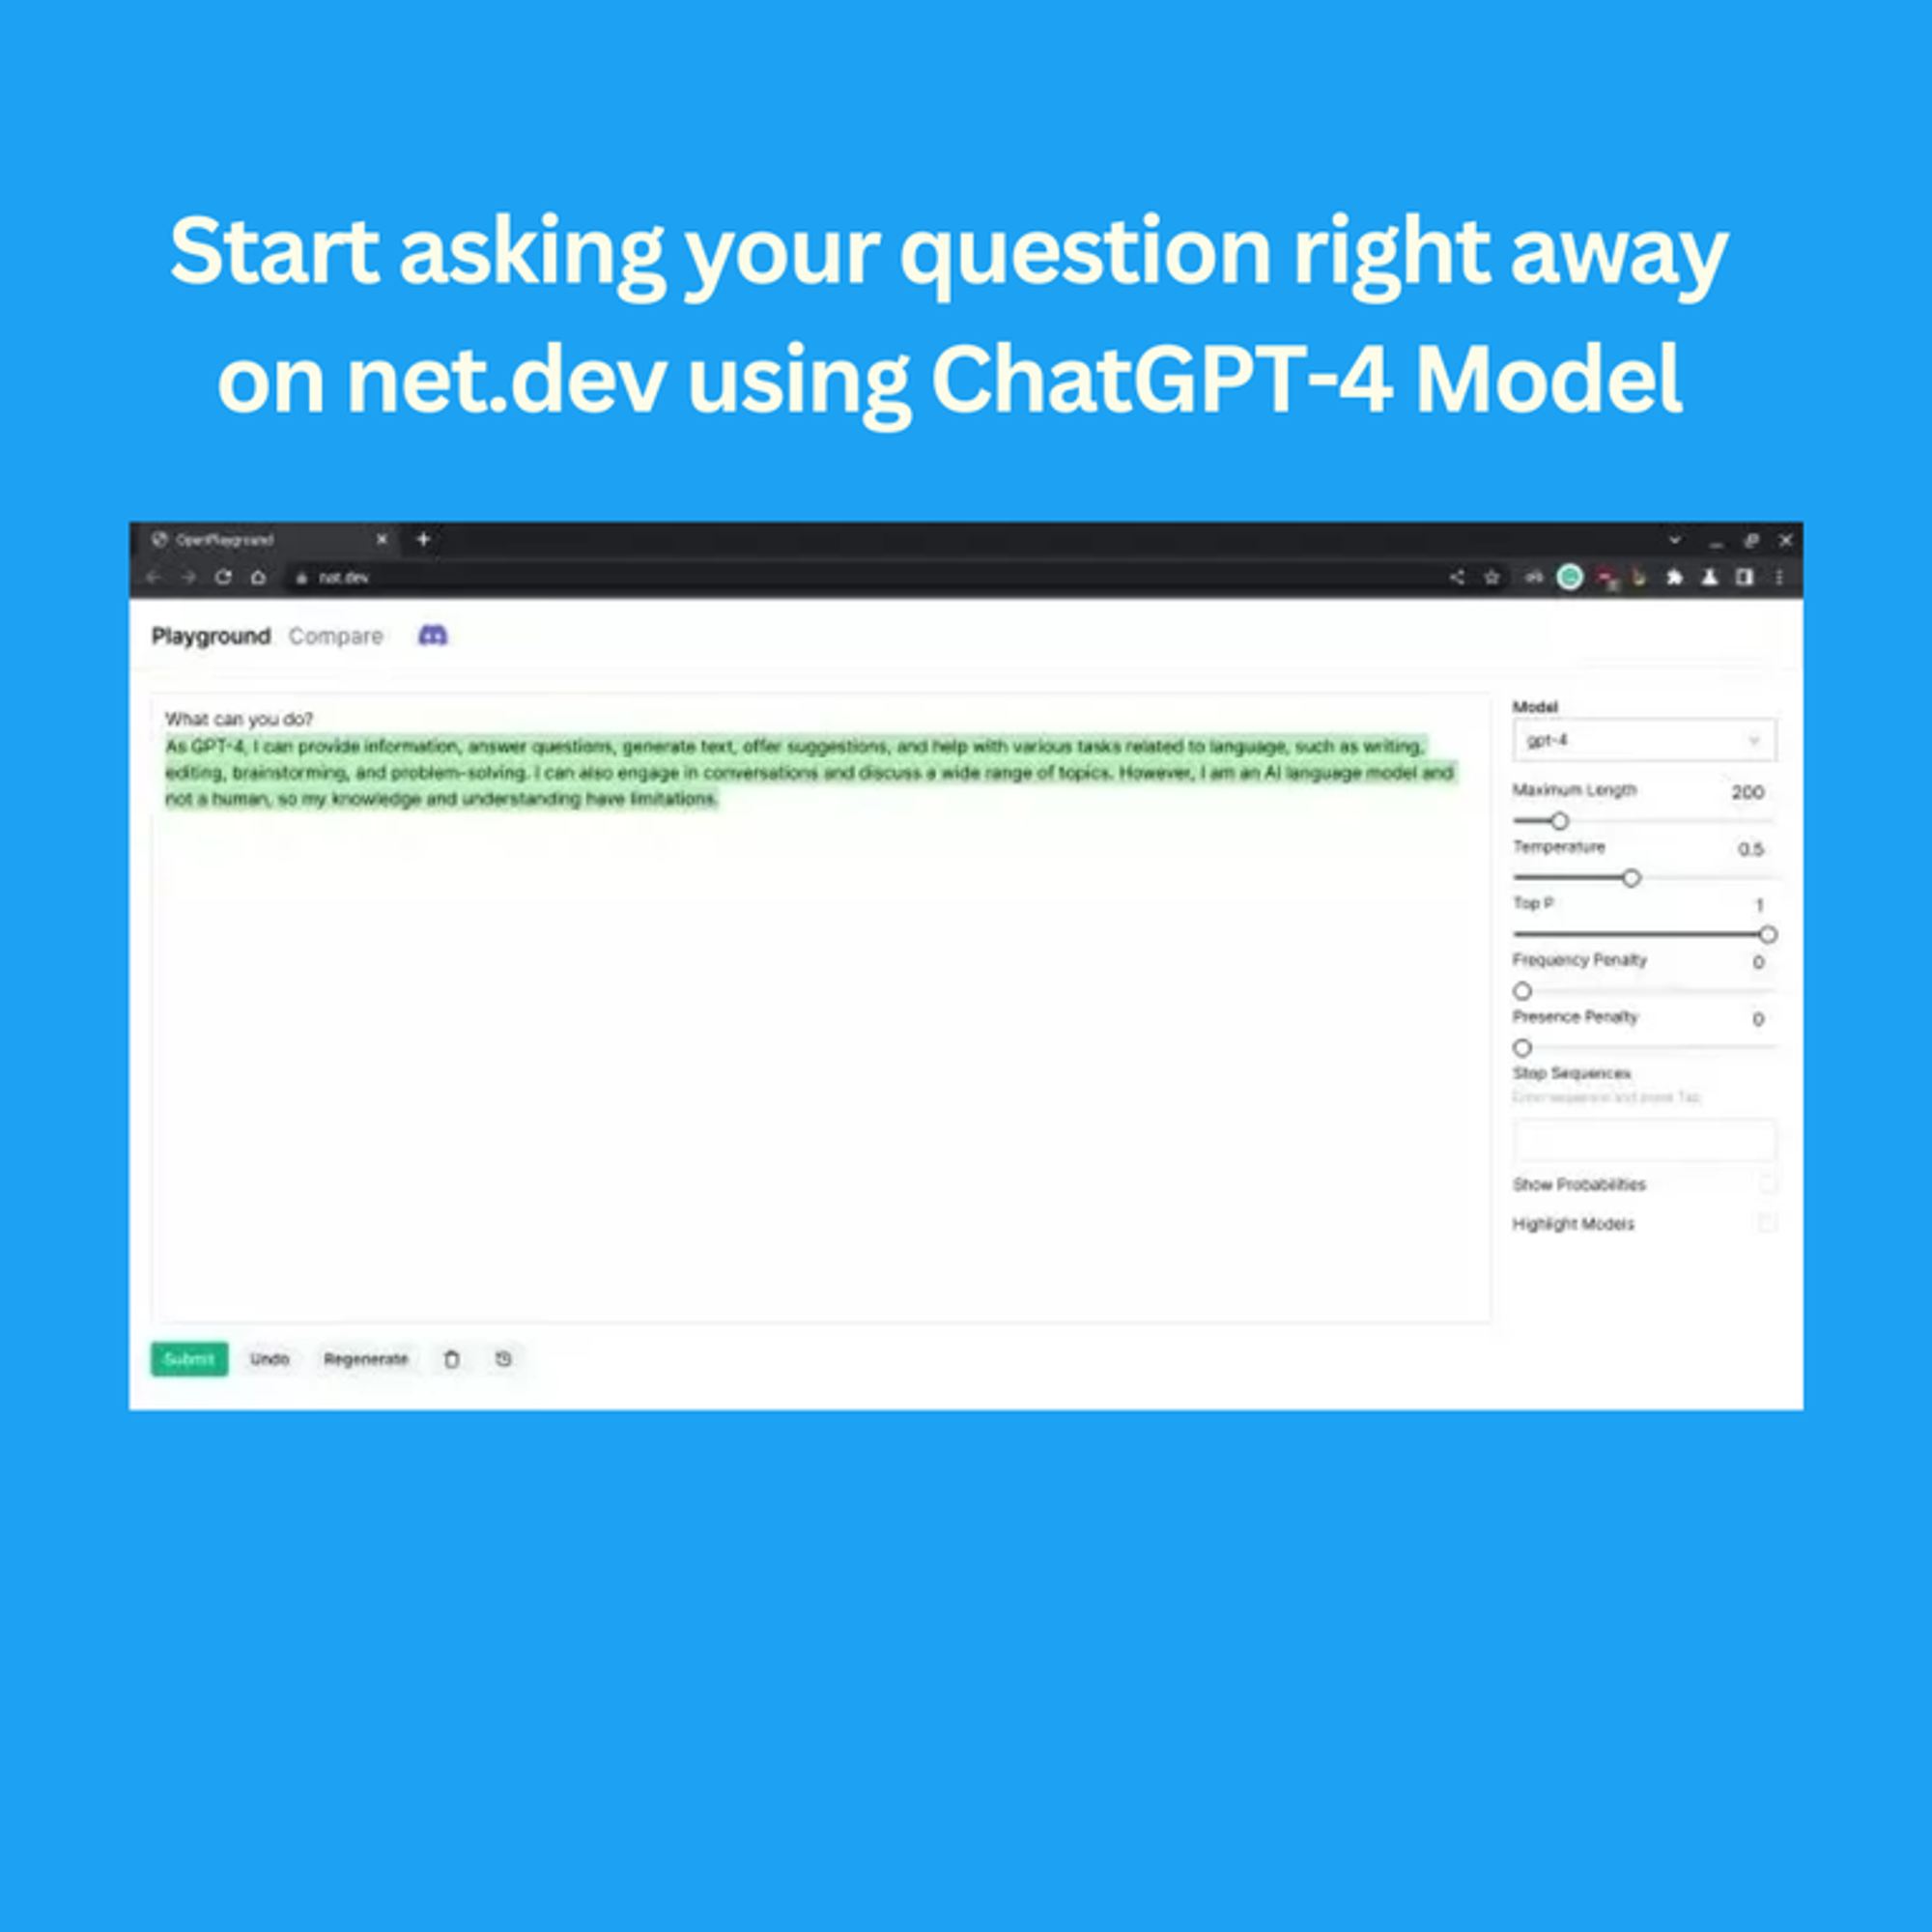 Start asking your question in the gpt-4 model